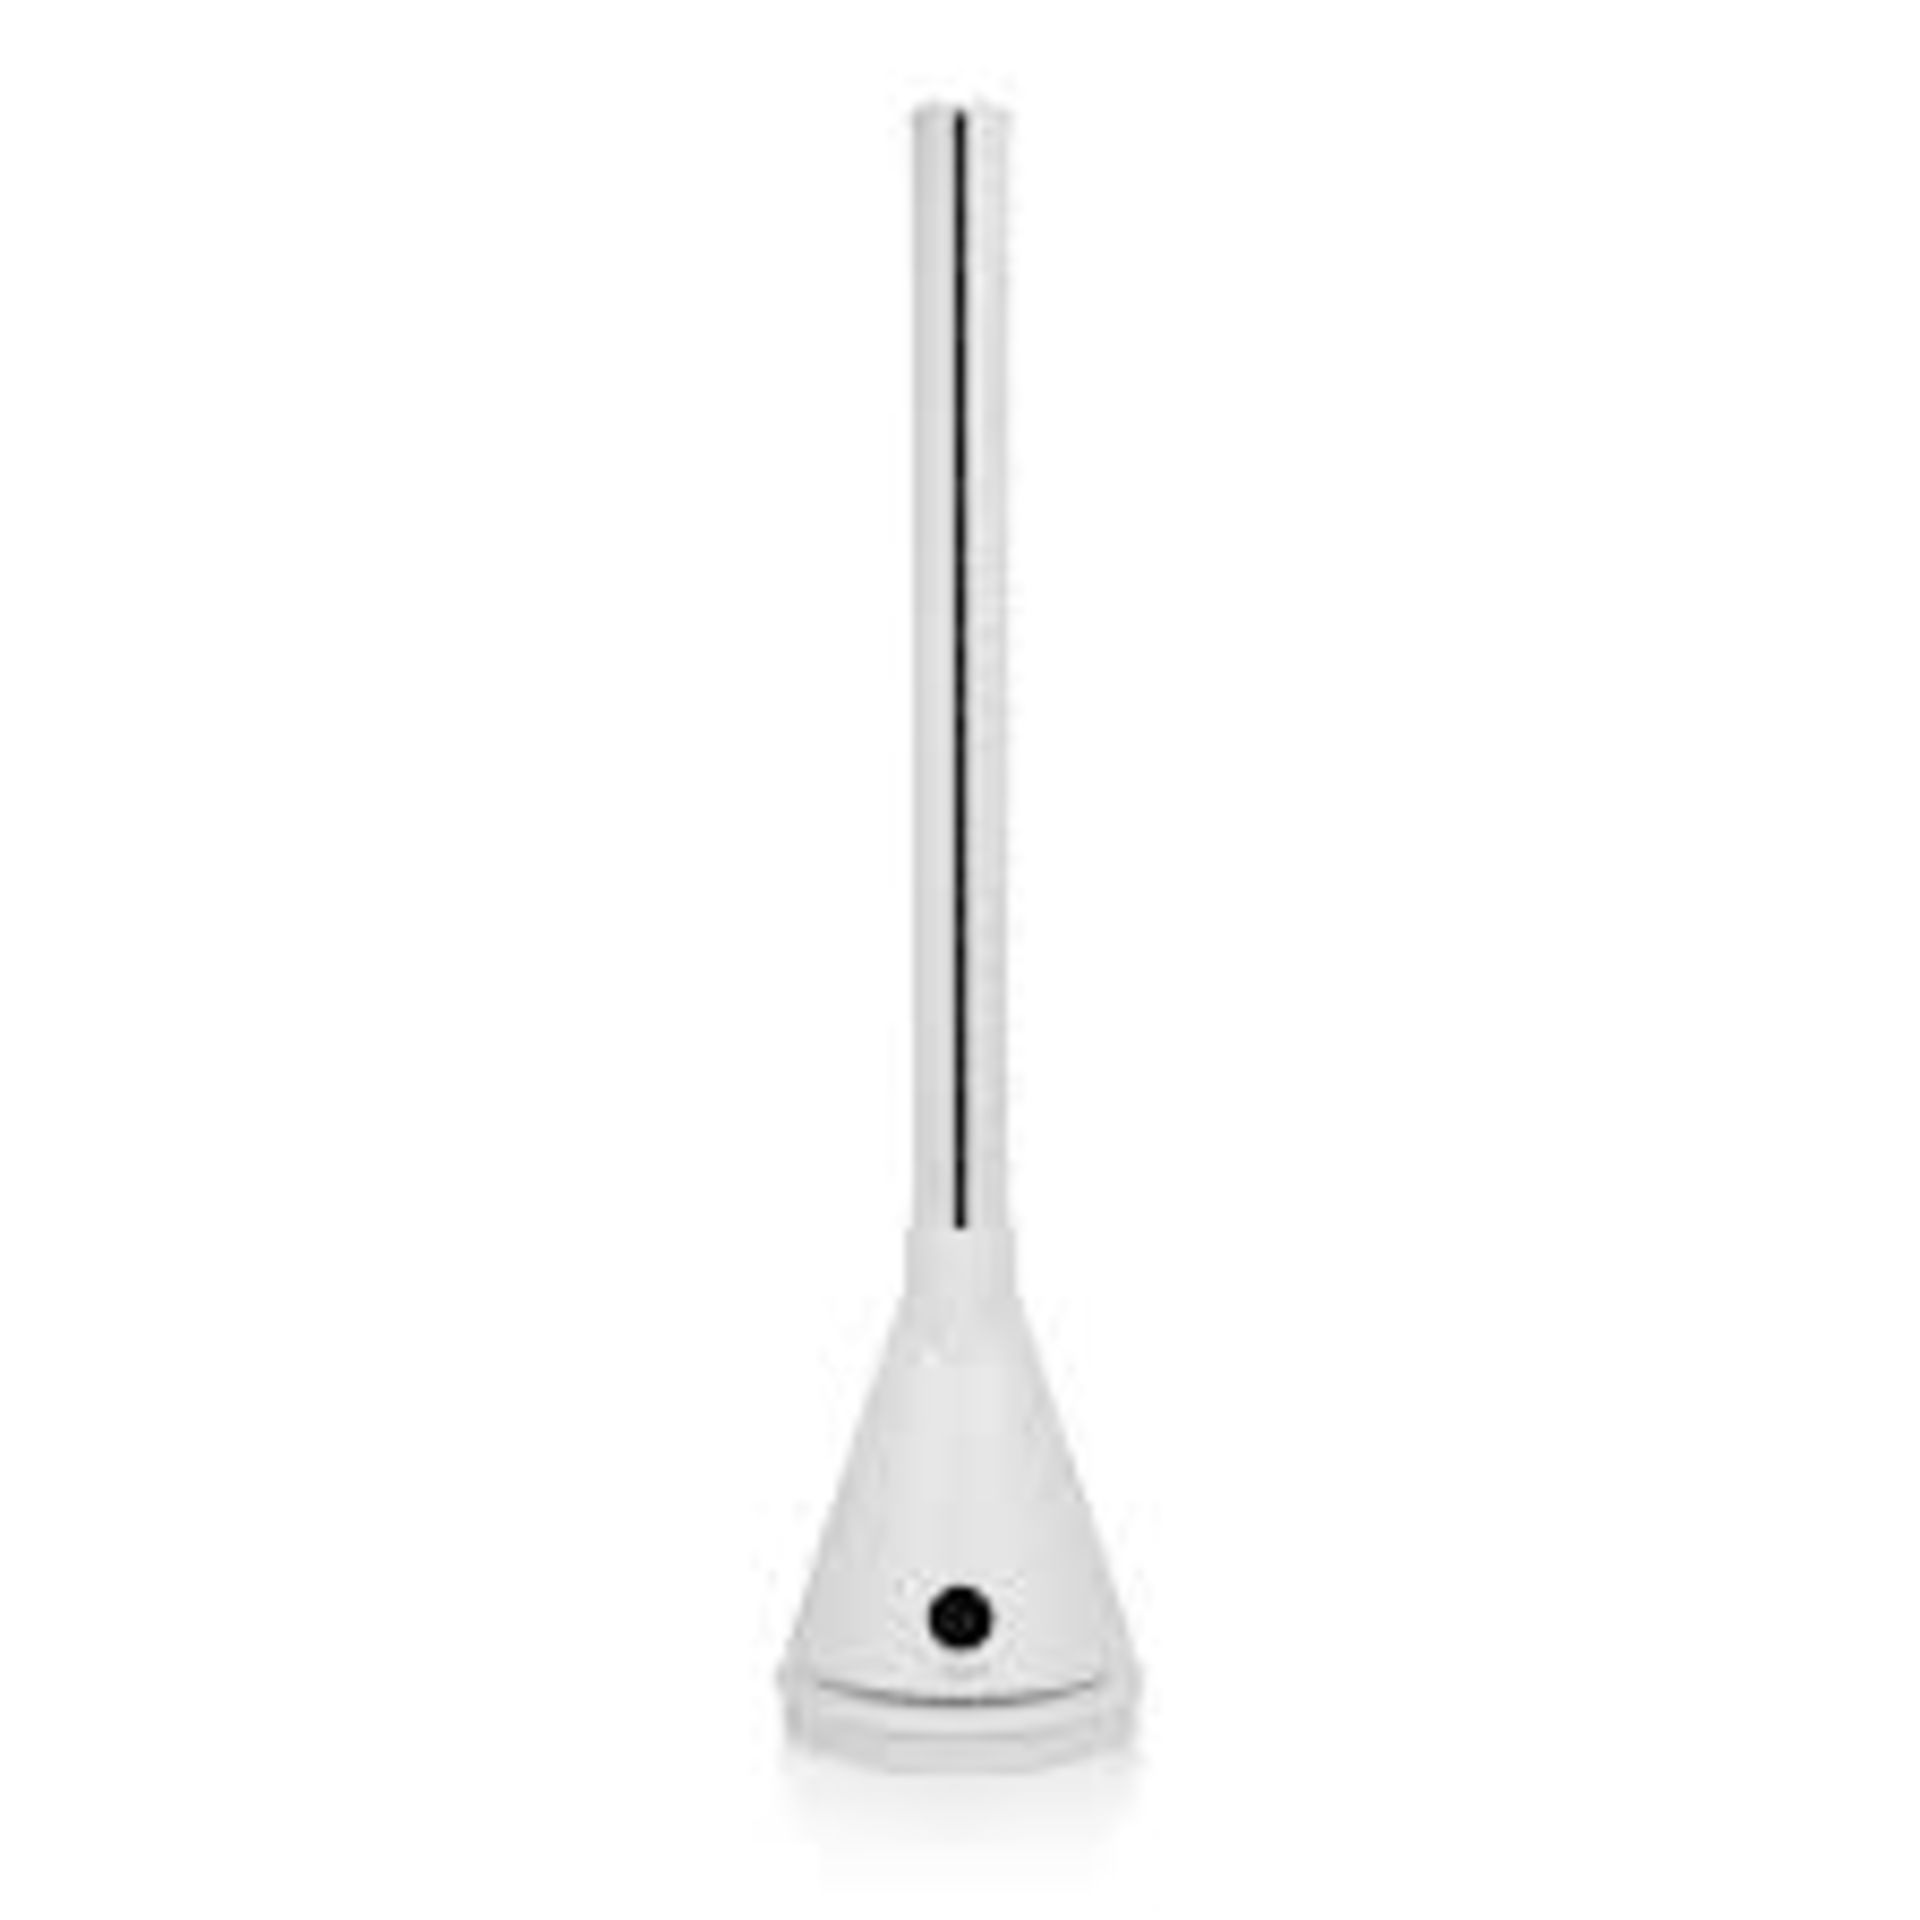 PRINCESS 347001 Smart Hot & Cool Tower Fan - White, White LOCATION 13A.11